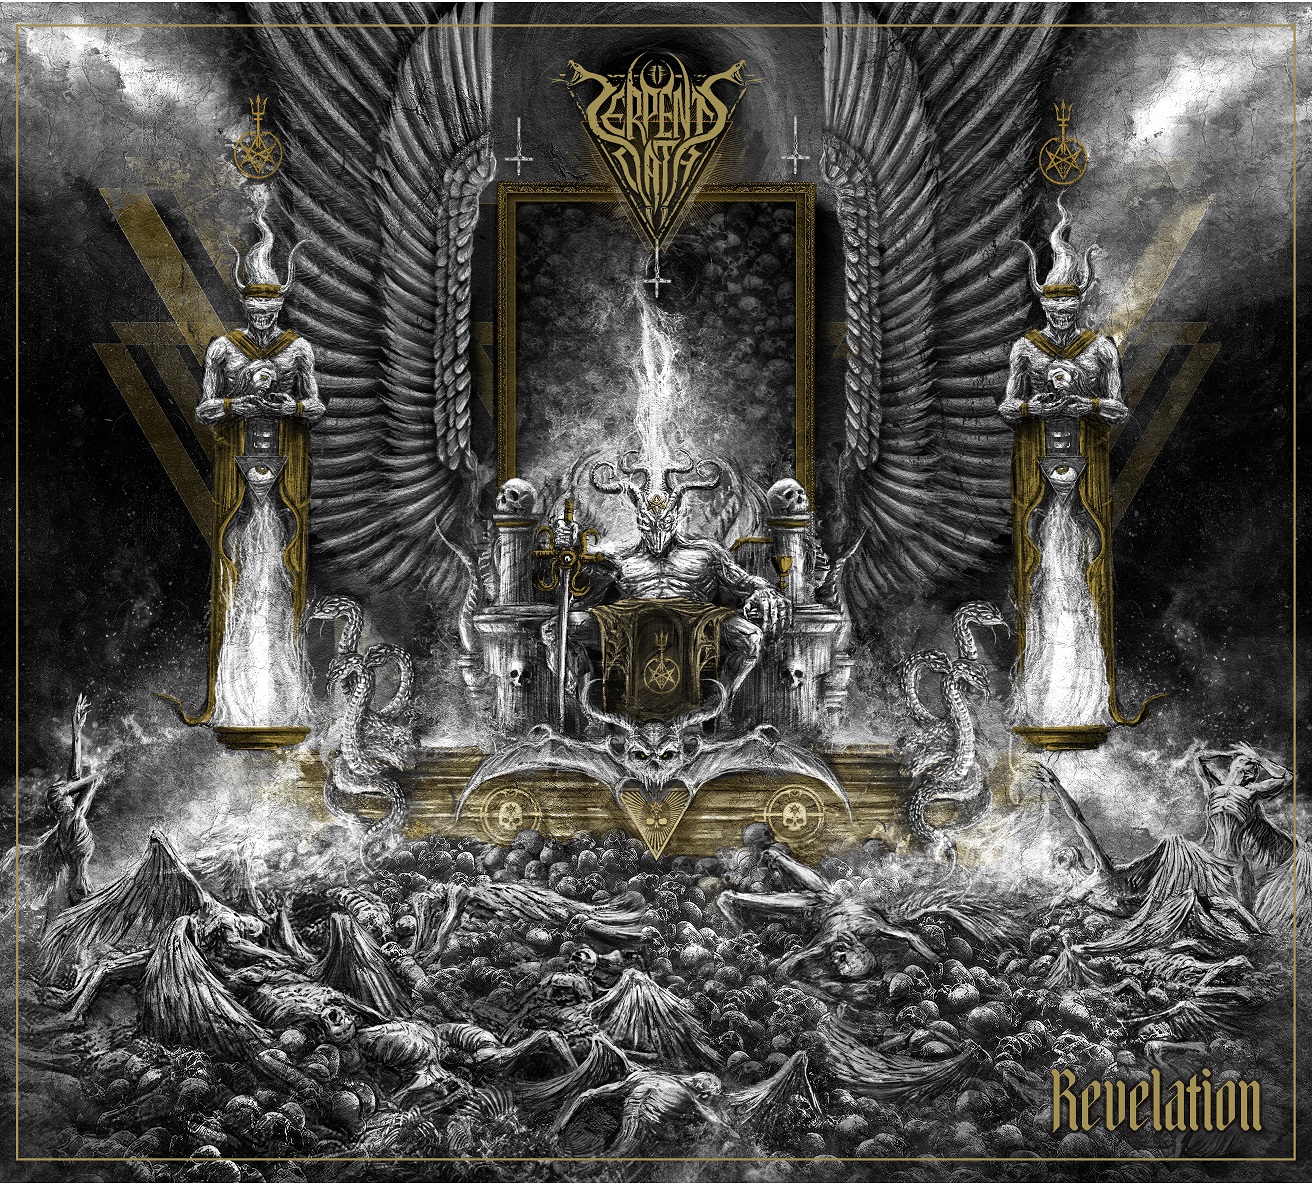 Press Release: Belgian Black Metal Horde Serpents Oath Are Proud To  Announce Their Third Album 'Revelation', Which Will Be Released On November  24th Through Odium Records (Black Altar, Ofermod, Beastcraft Et Al). 